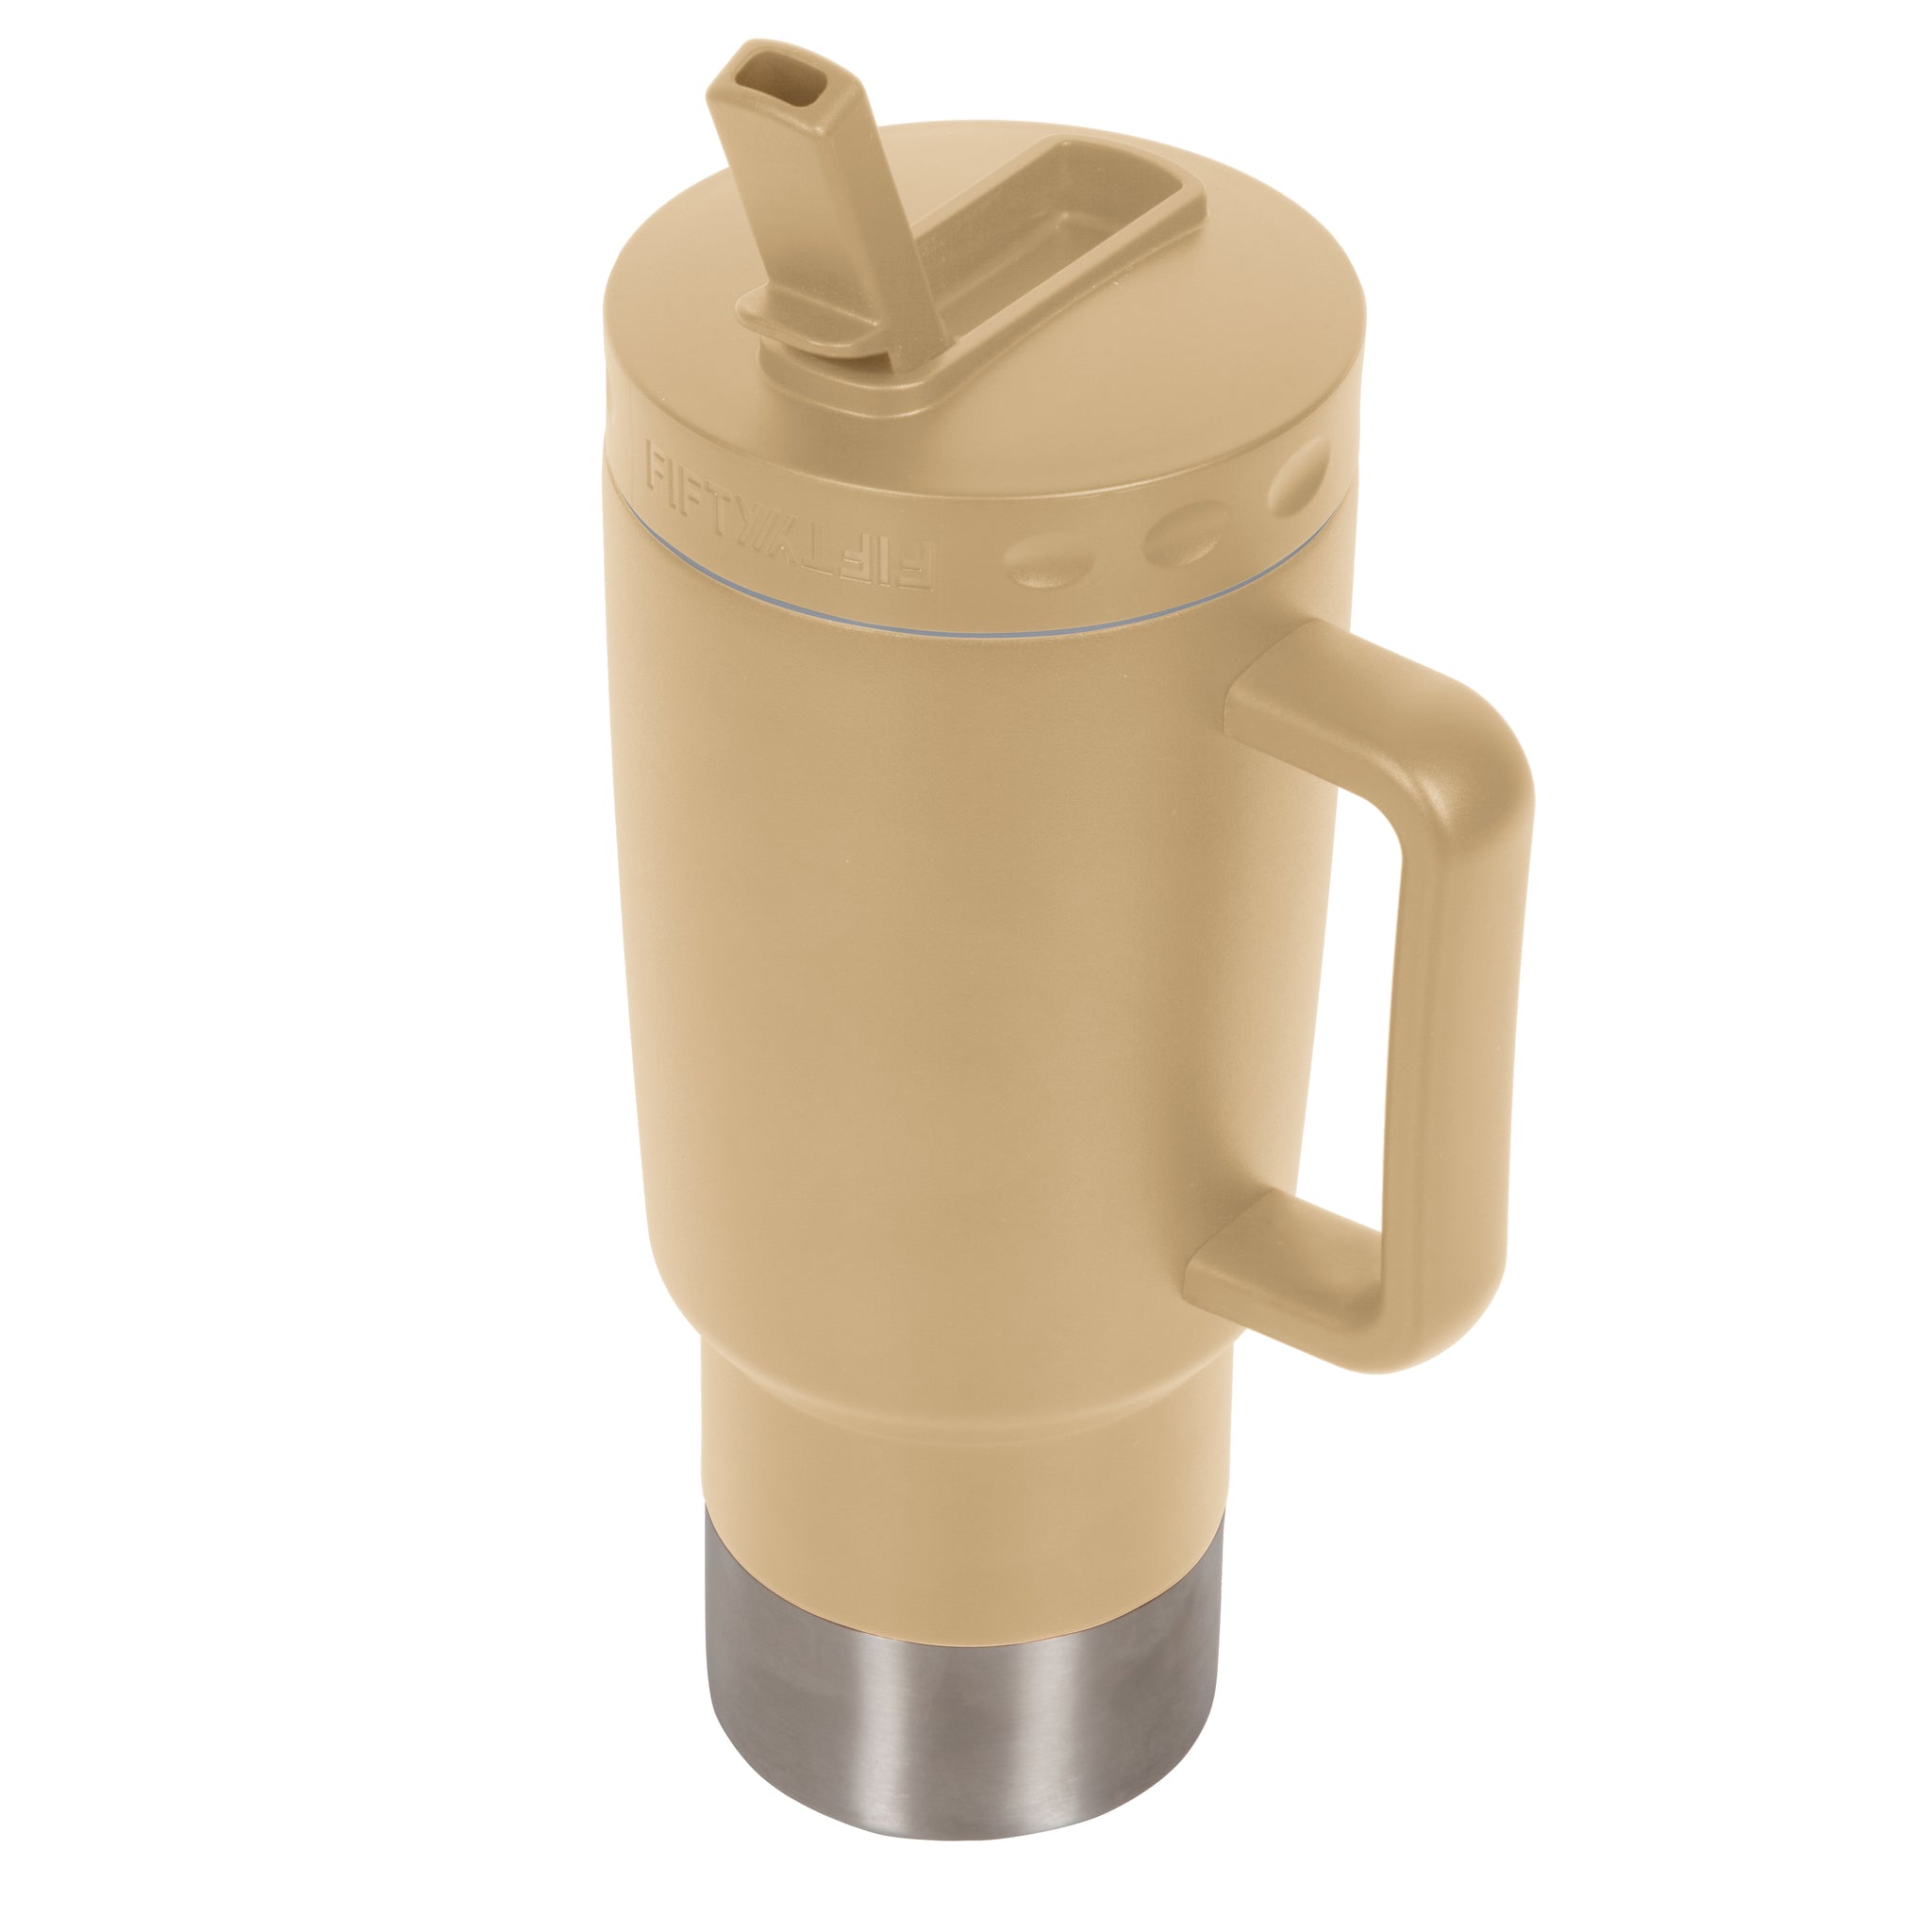 Stanley Tumbler Straw Topper/Caps New 8 Colors To Choose From